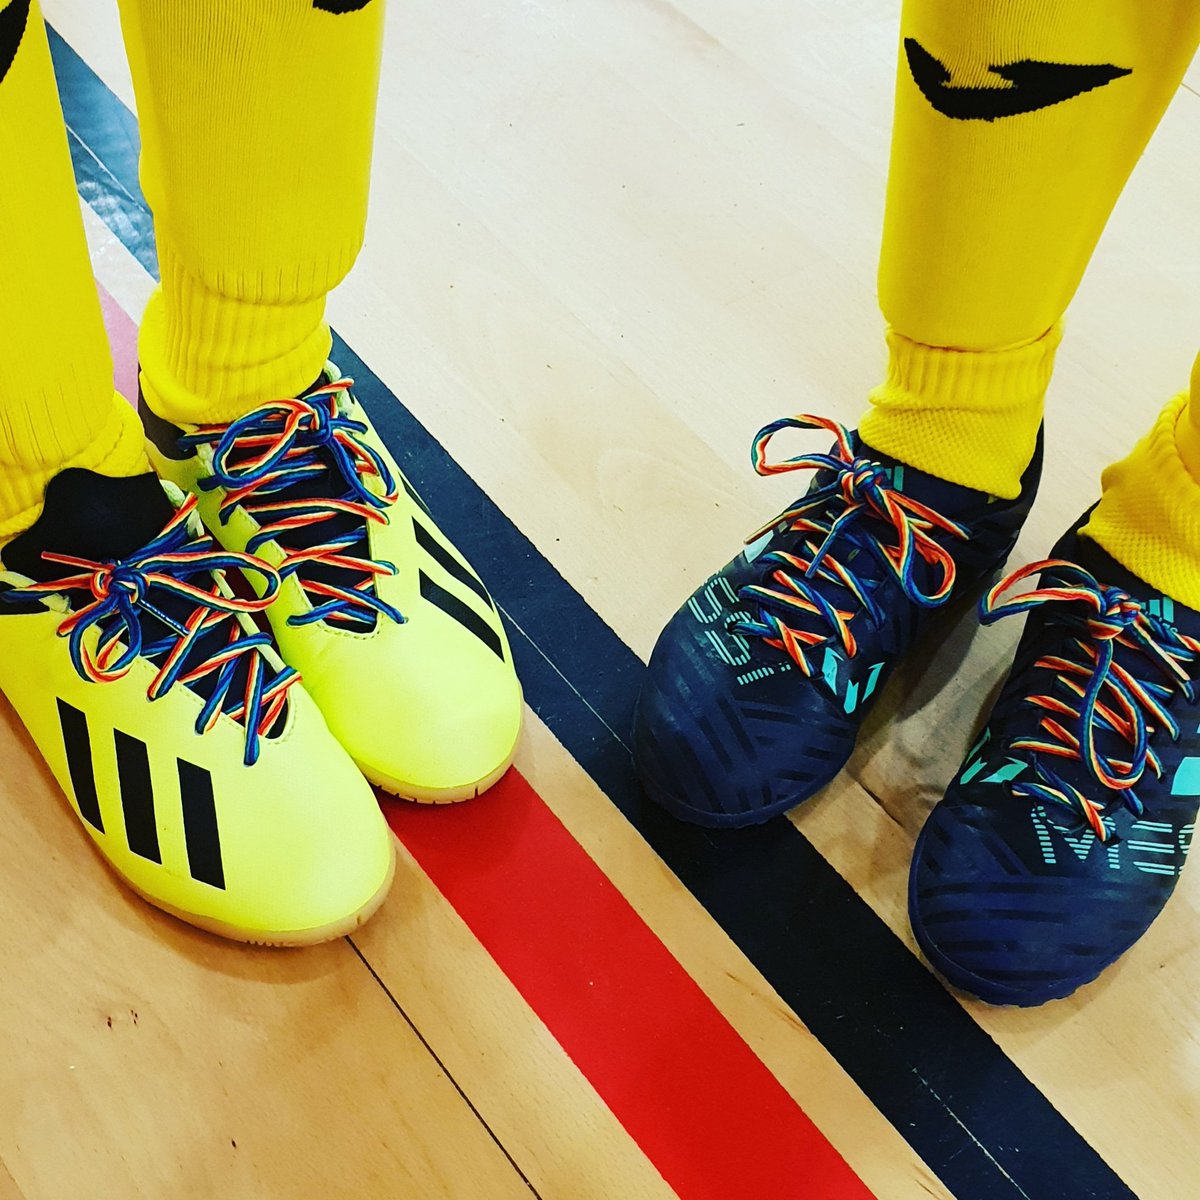 A couple of our boys showing off their rainbow laces at futsal this morning 
#RainbowLaces #NorfolkFootballisProud